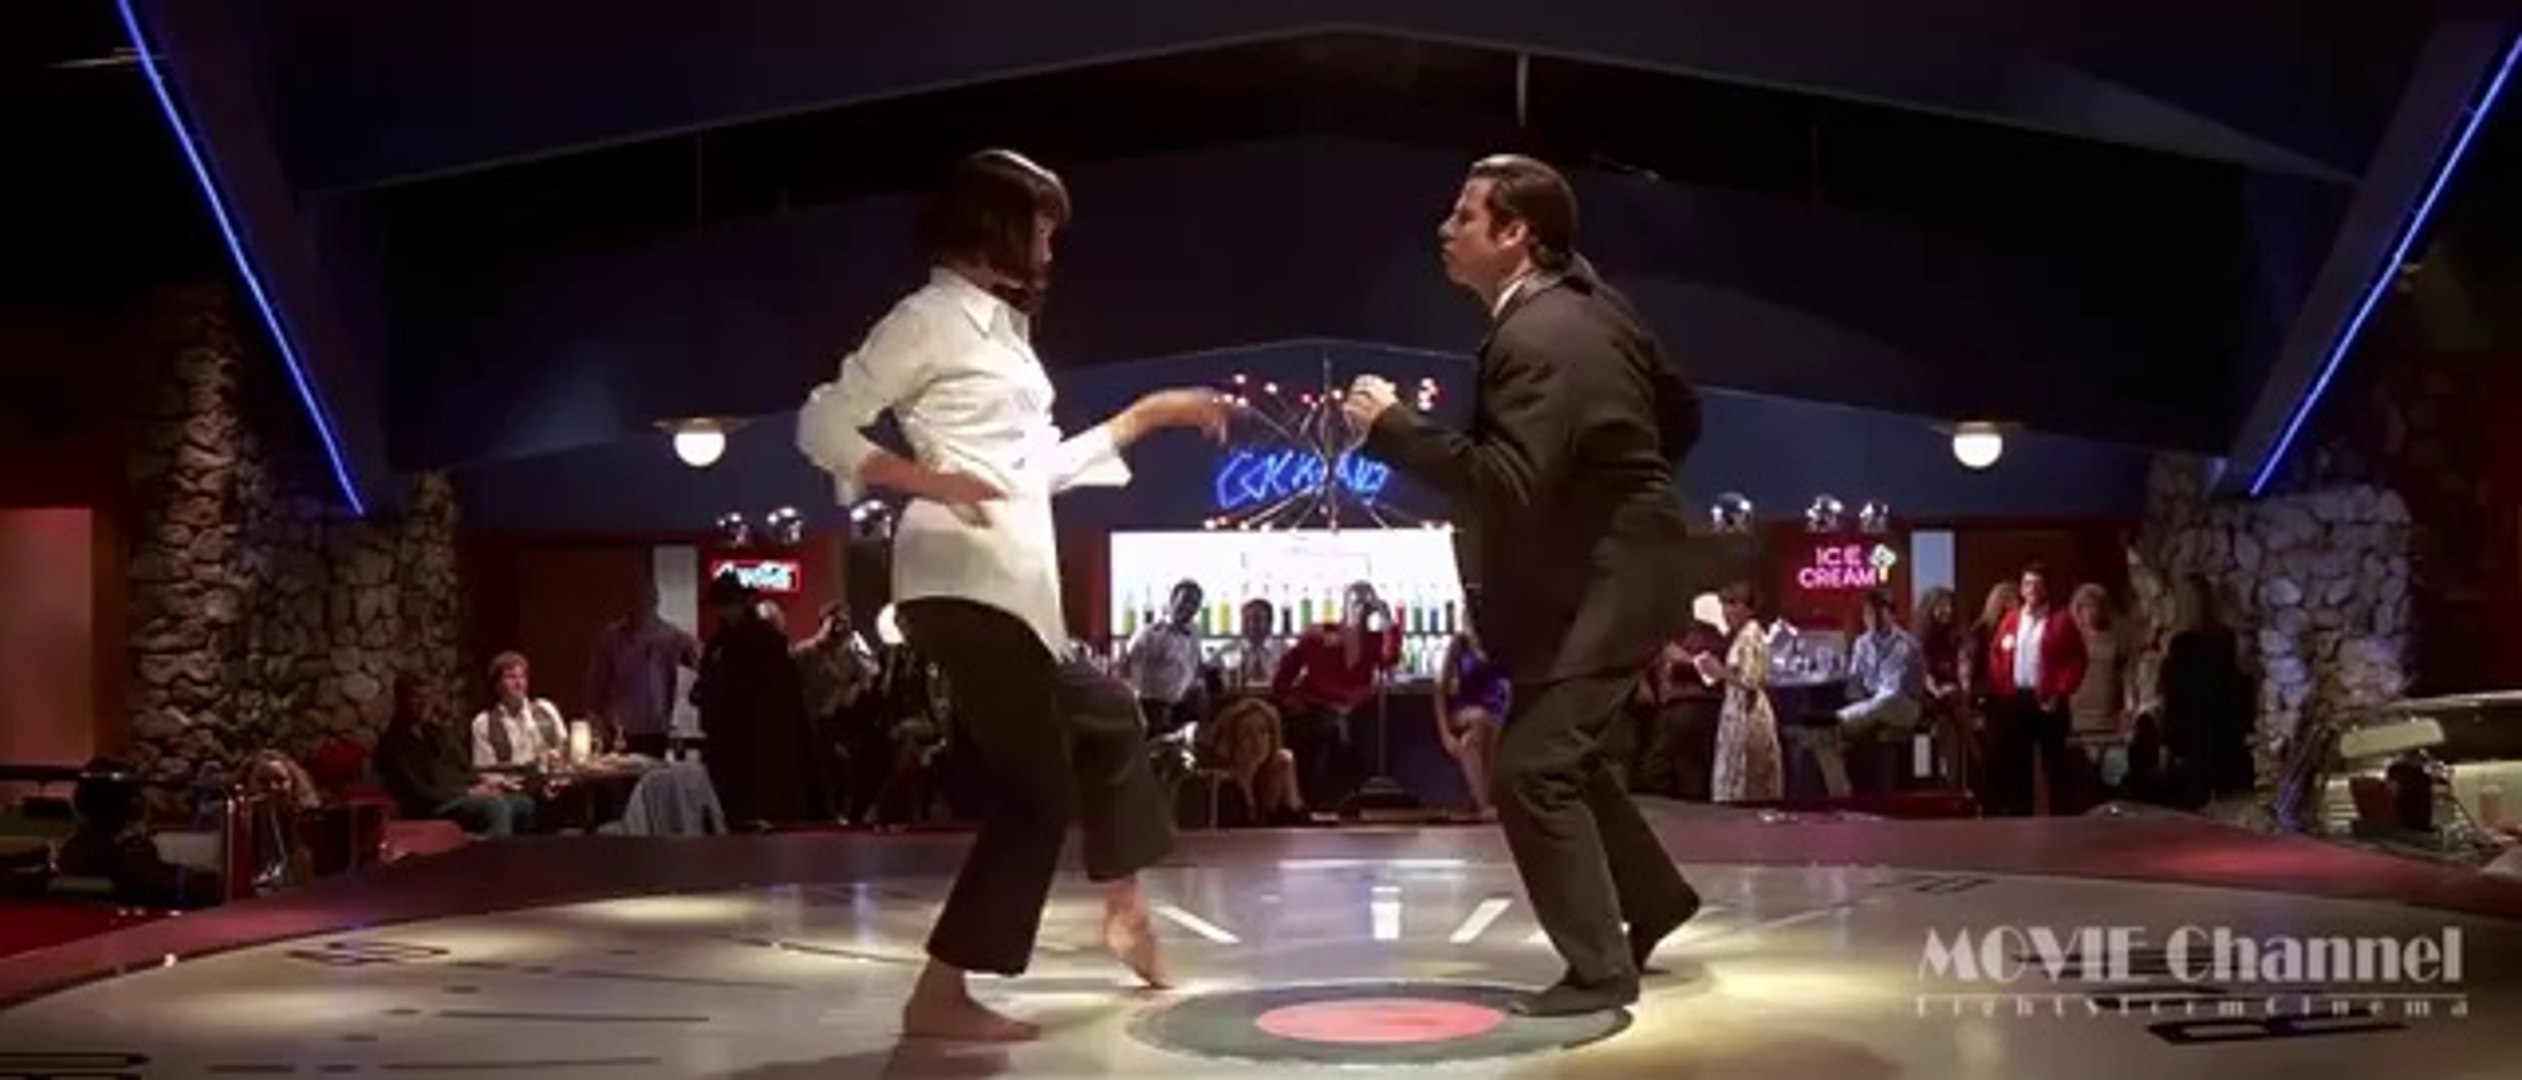 Pulp Fiction (1994) - Dancing at Jack Rabbit Slim's (Movie Clip) [HD] -  video Dailymotion